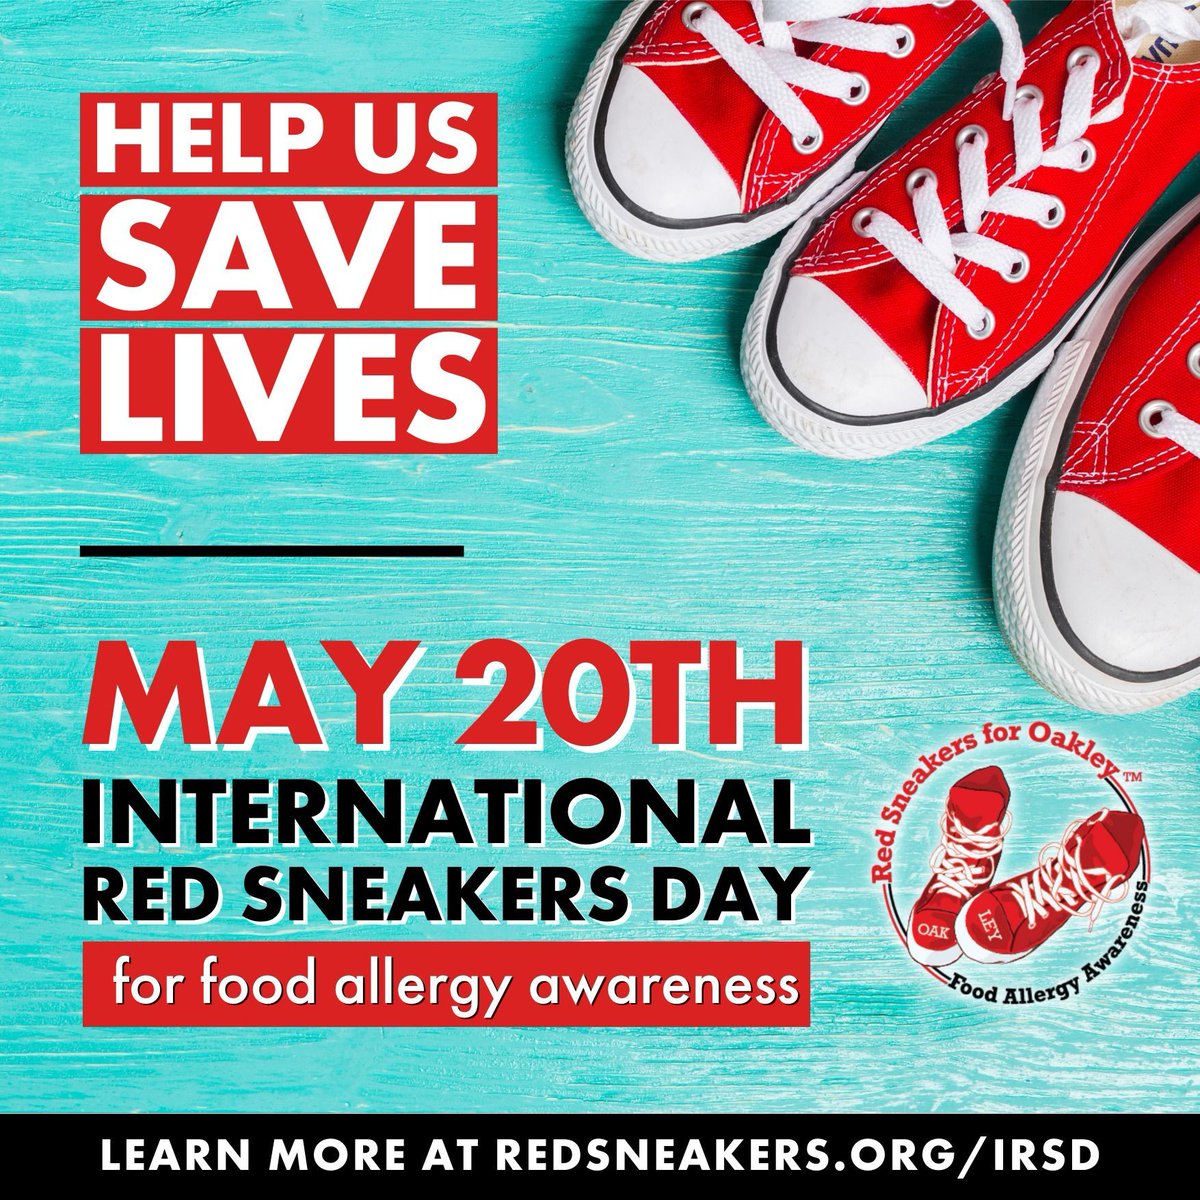 #Repost from our friends at @oakley_red

On May 20th, post a photo/video of yourself wearing red sneakers (or anything red!).

Be sure to TAG @oakley_red and use hashtags:
#InternationalRedSneakersDay
#FoodAllergyAwareness
#RedSneakersForOakley
#FoodAllergy